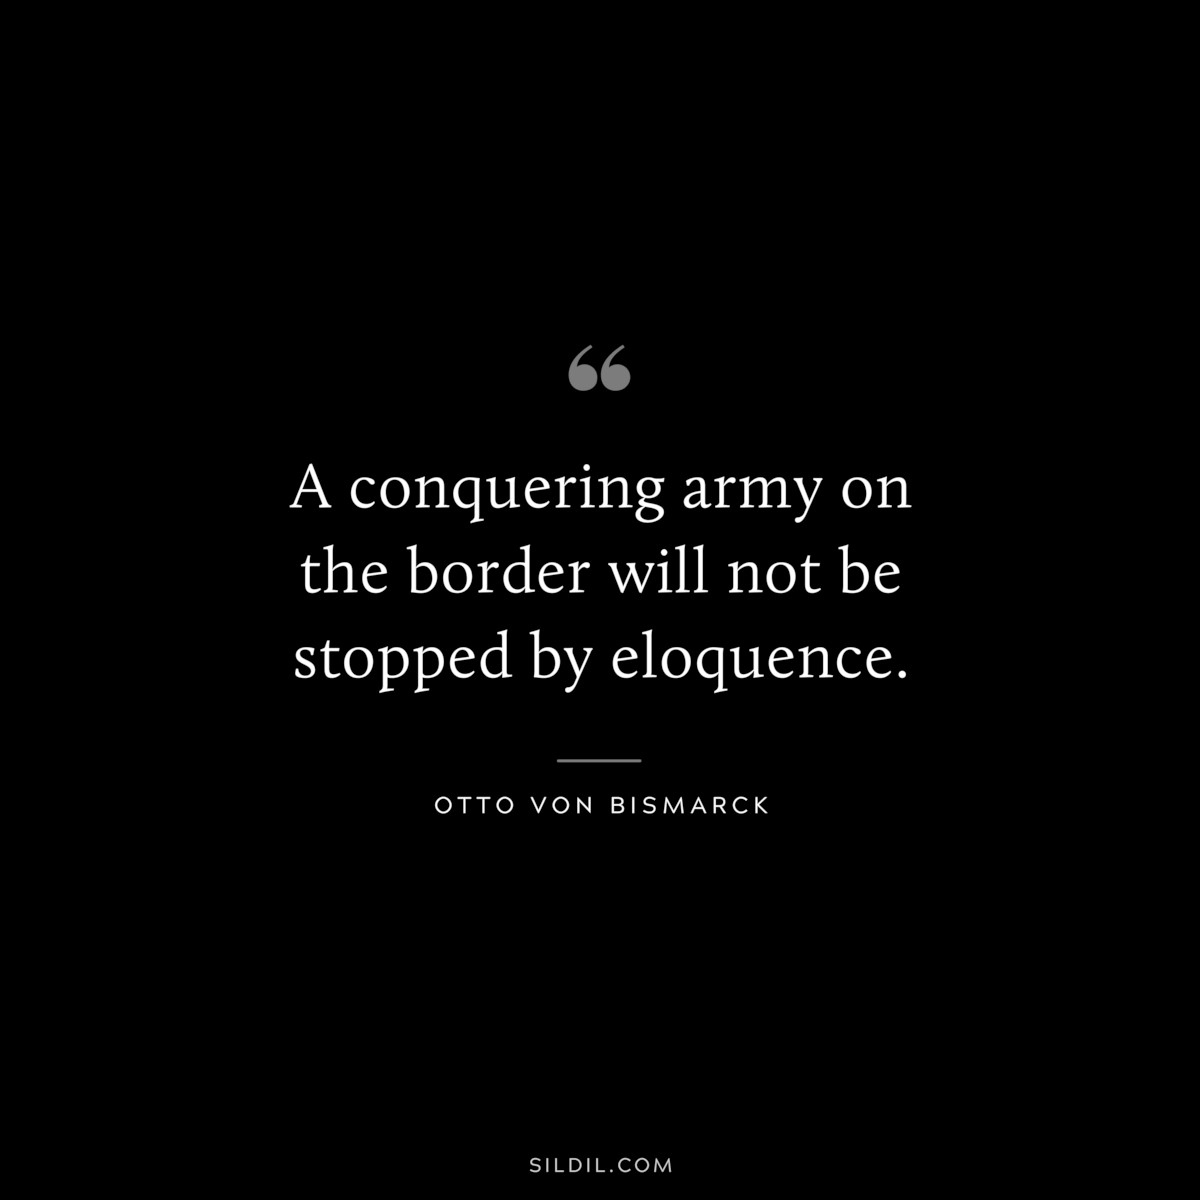 A conquering army on the border will not be stopped by eloquence. ― Otto von Bismarck